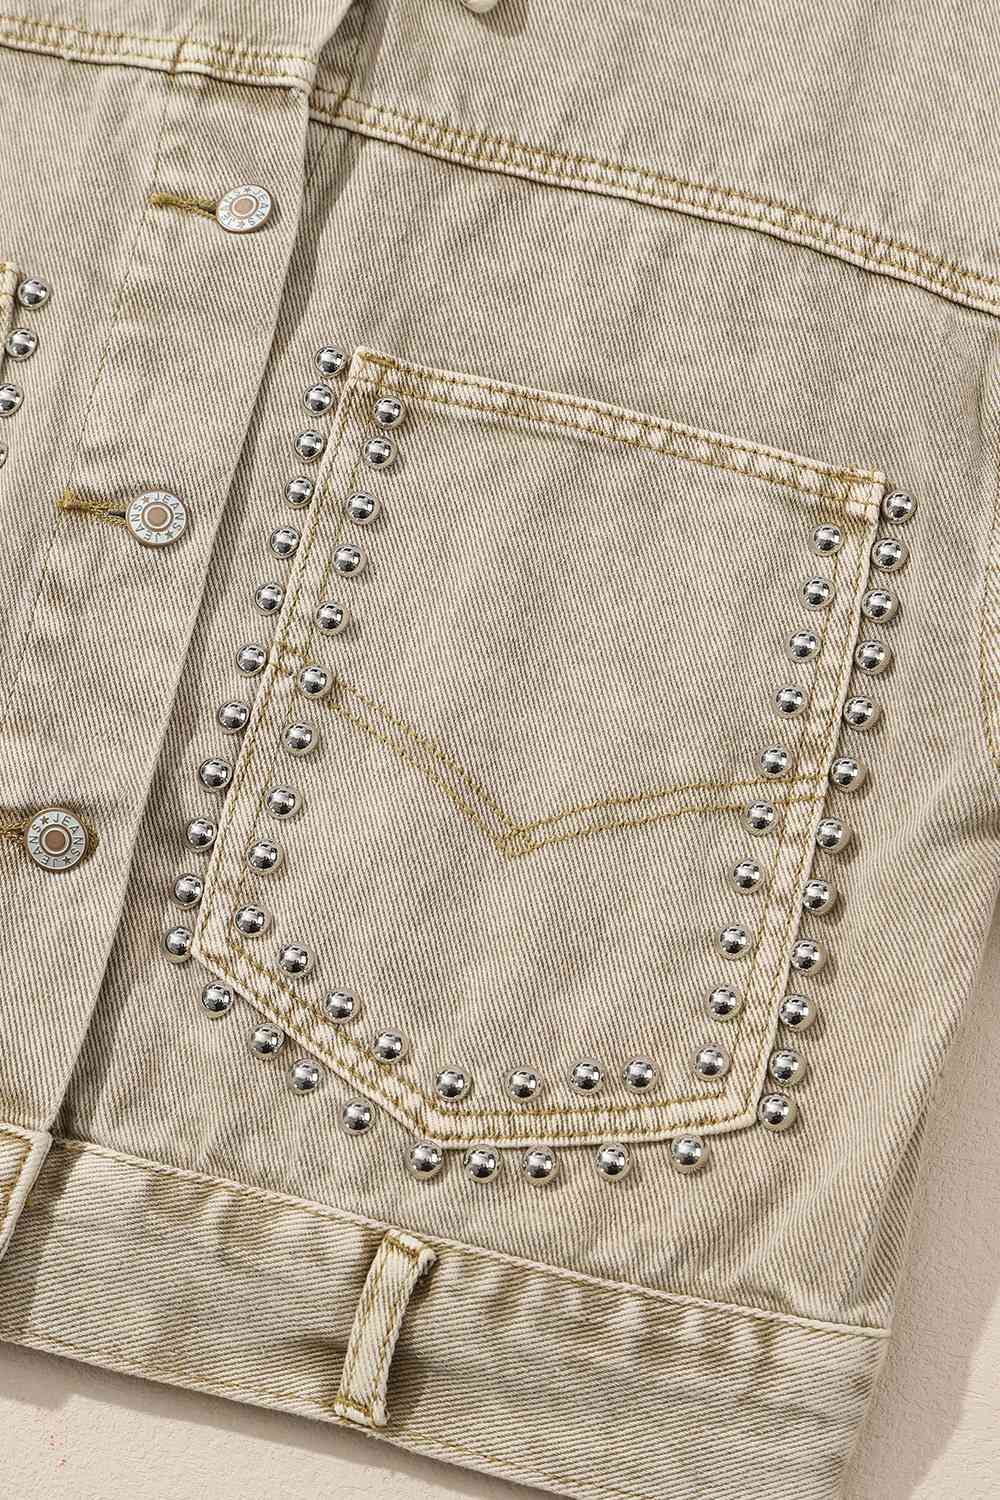 Studded Collared Neck Denim Jacket with Pockets - By Baano